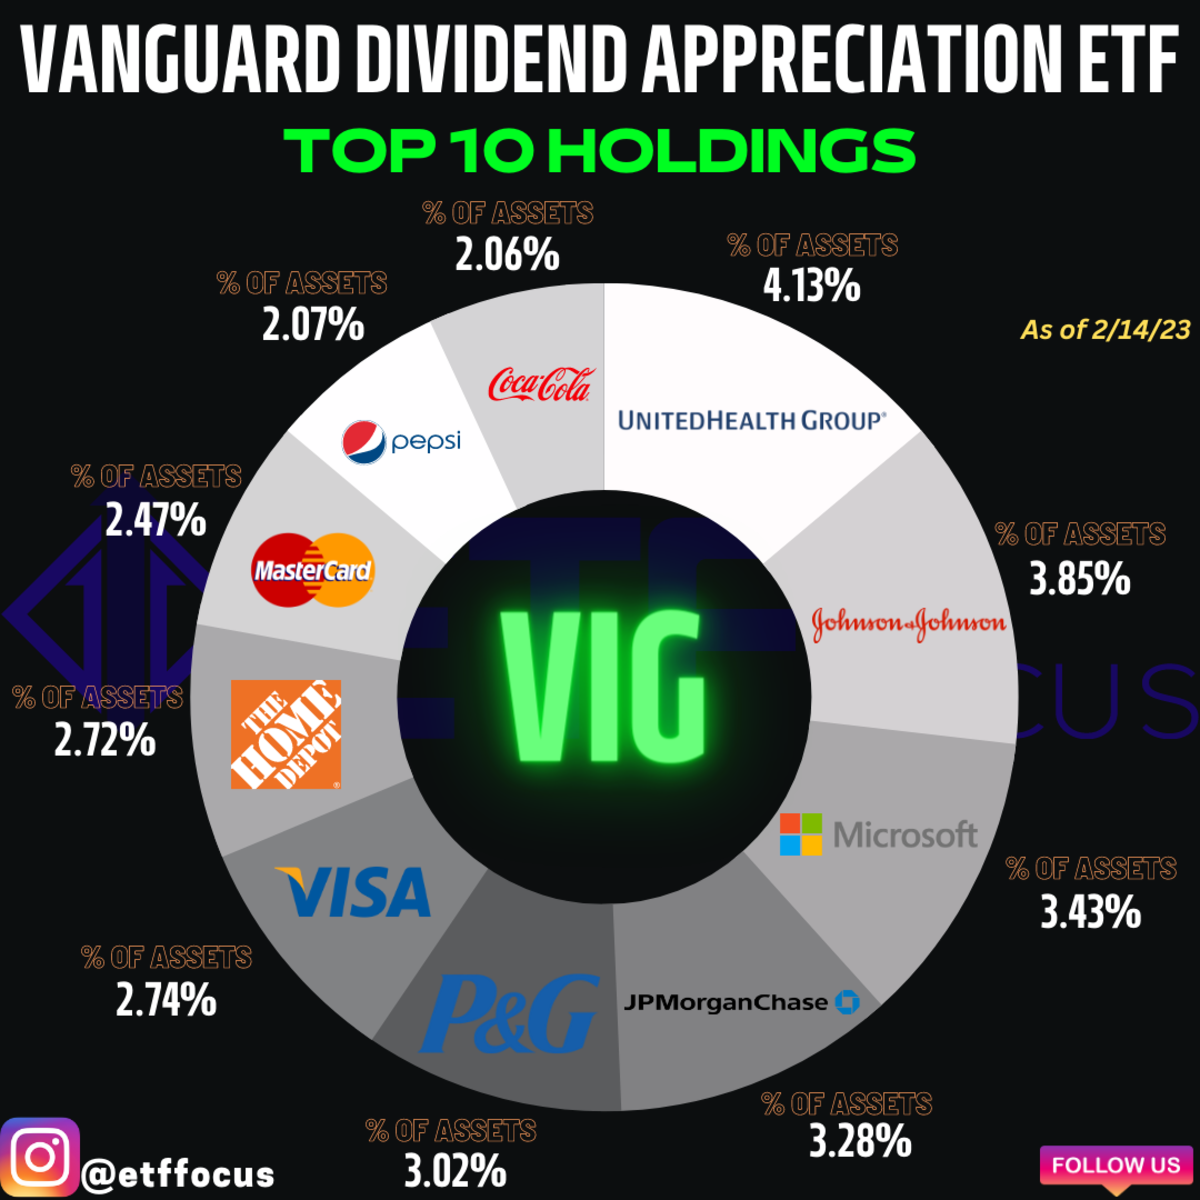 VIG Durable & Emerging Dividend Growth Stocks Give It Some Extra Zest